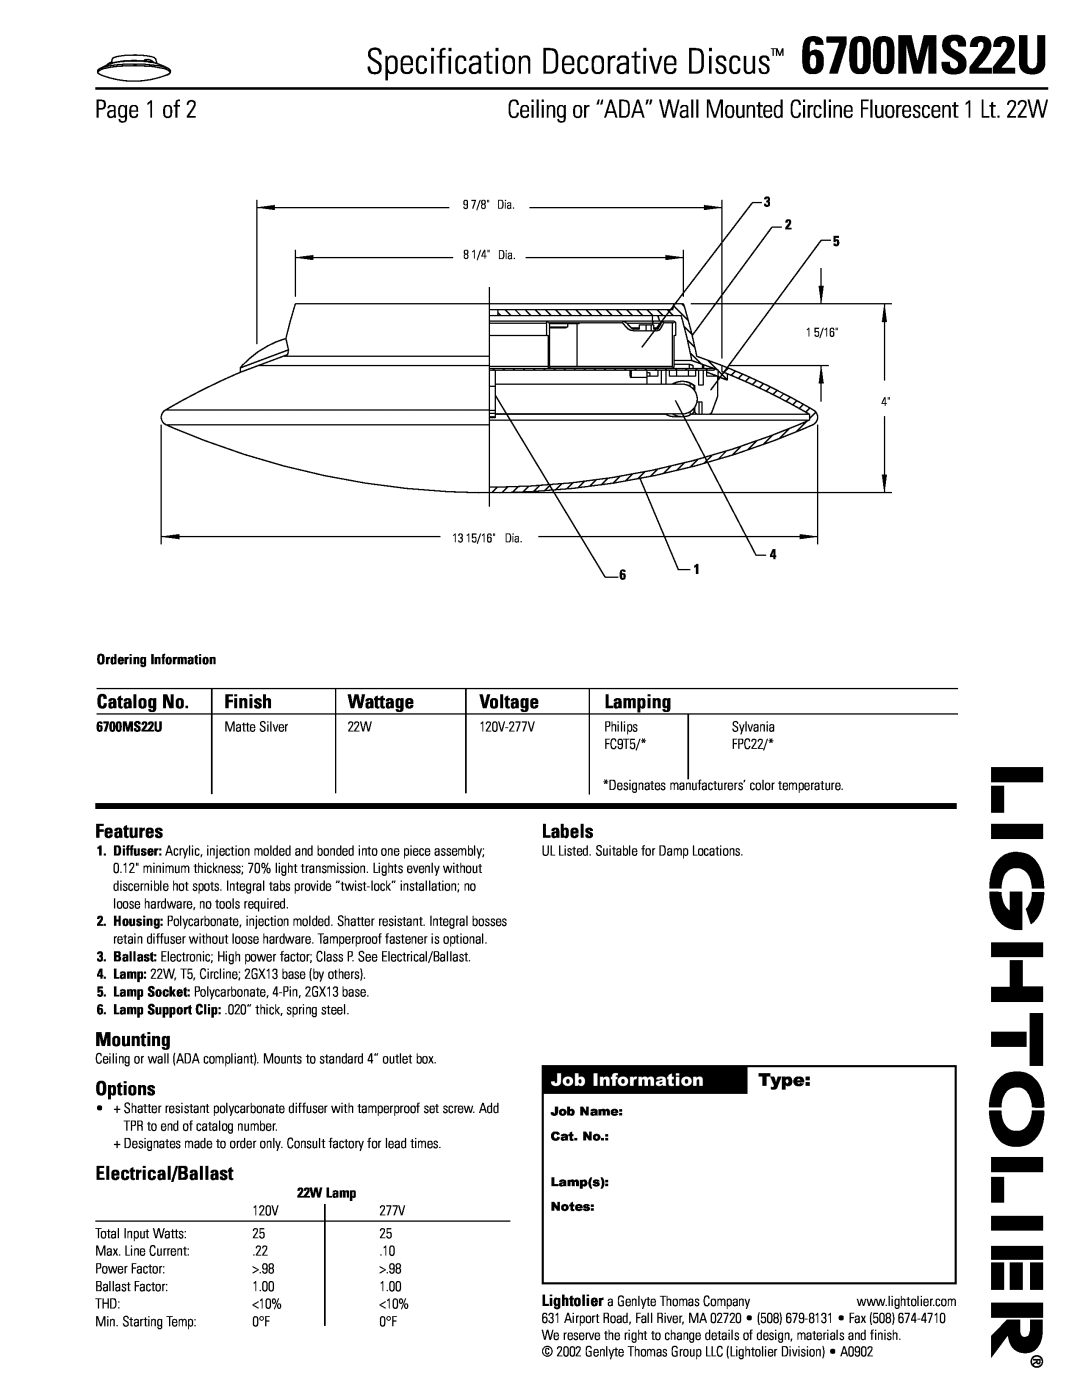 Lightolier manual Specification Decorative Discus 6700MS22U, Page 1 of, Job Information, Type, Voltage, 22W Lamp 